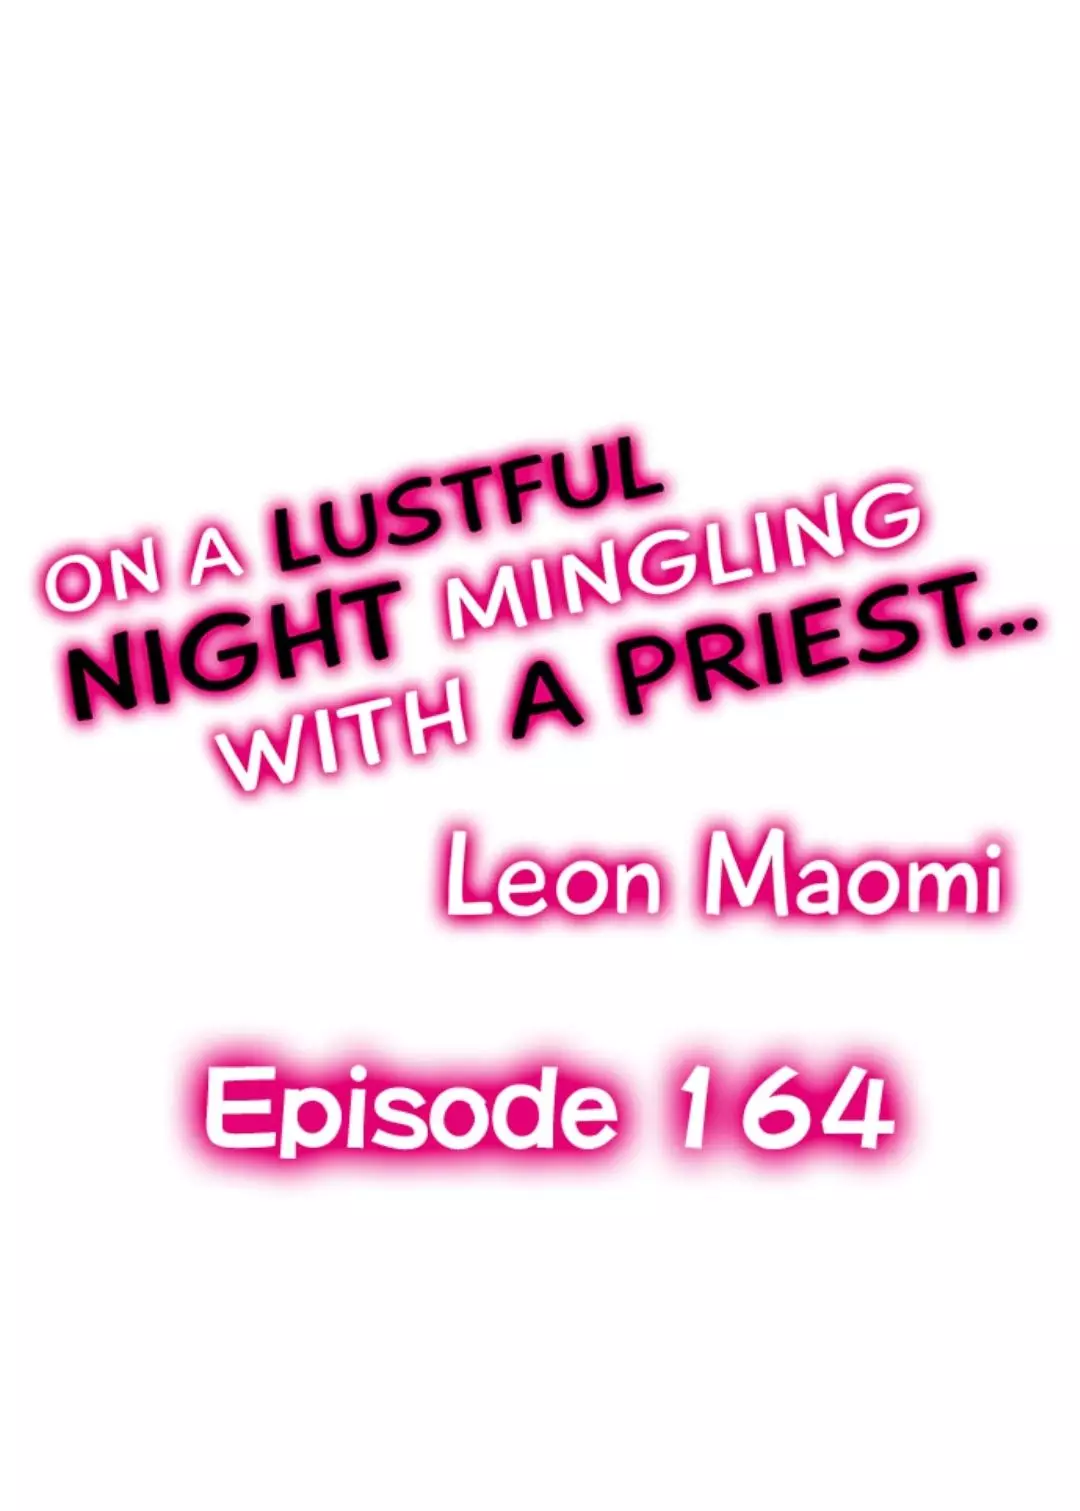 On A Lustful Night Mingling With A Priest - 164 page 1-c8e7360a